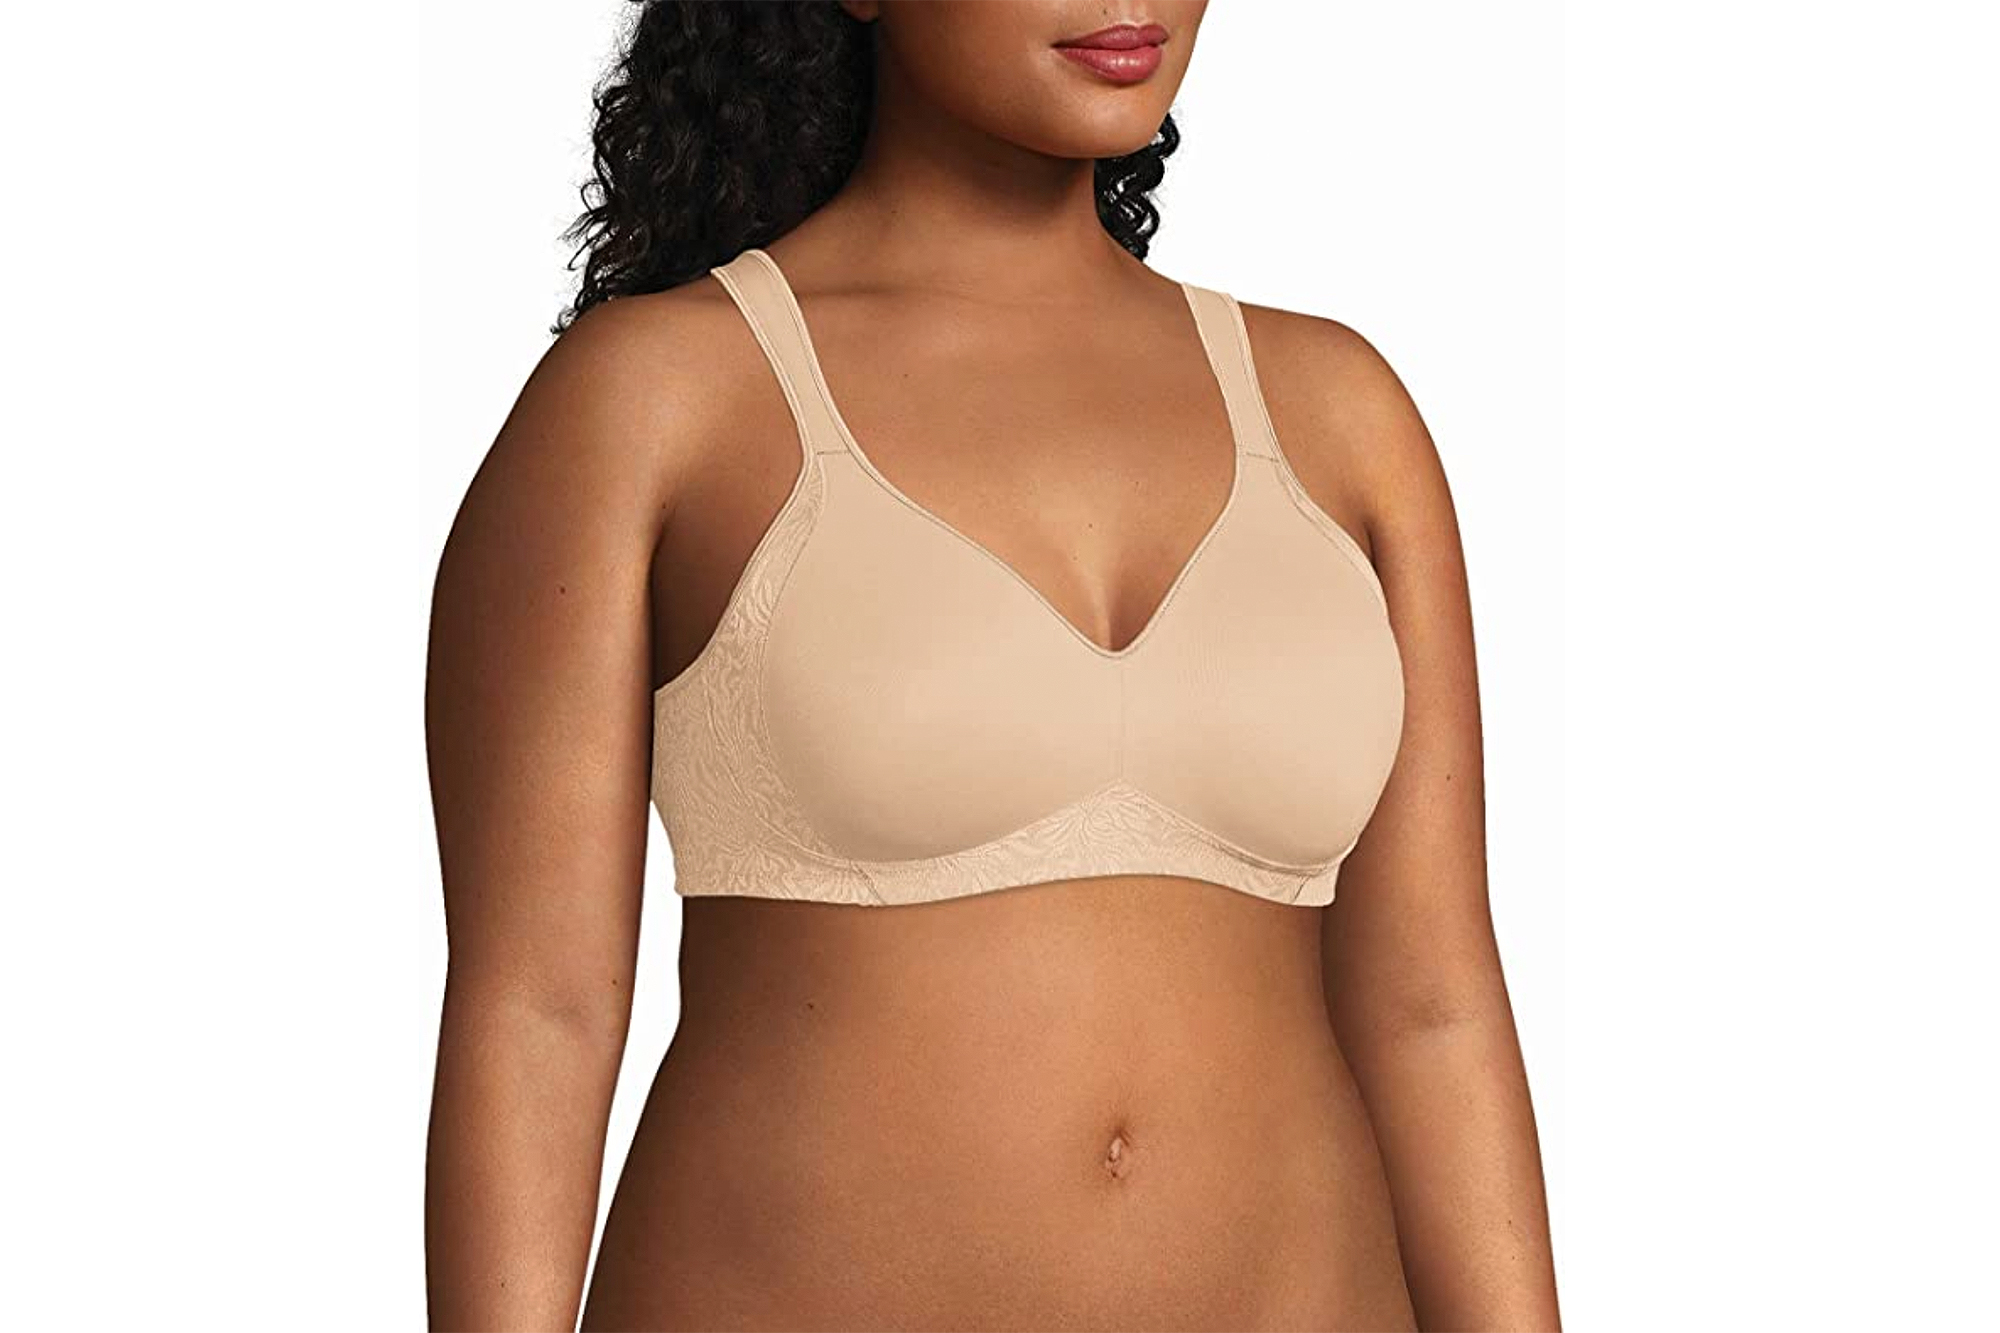 Playtex Wireless Bra Provides Proper Back Support for Shoppers